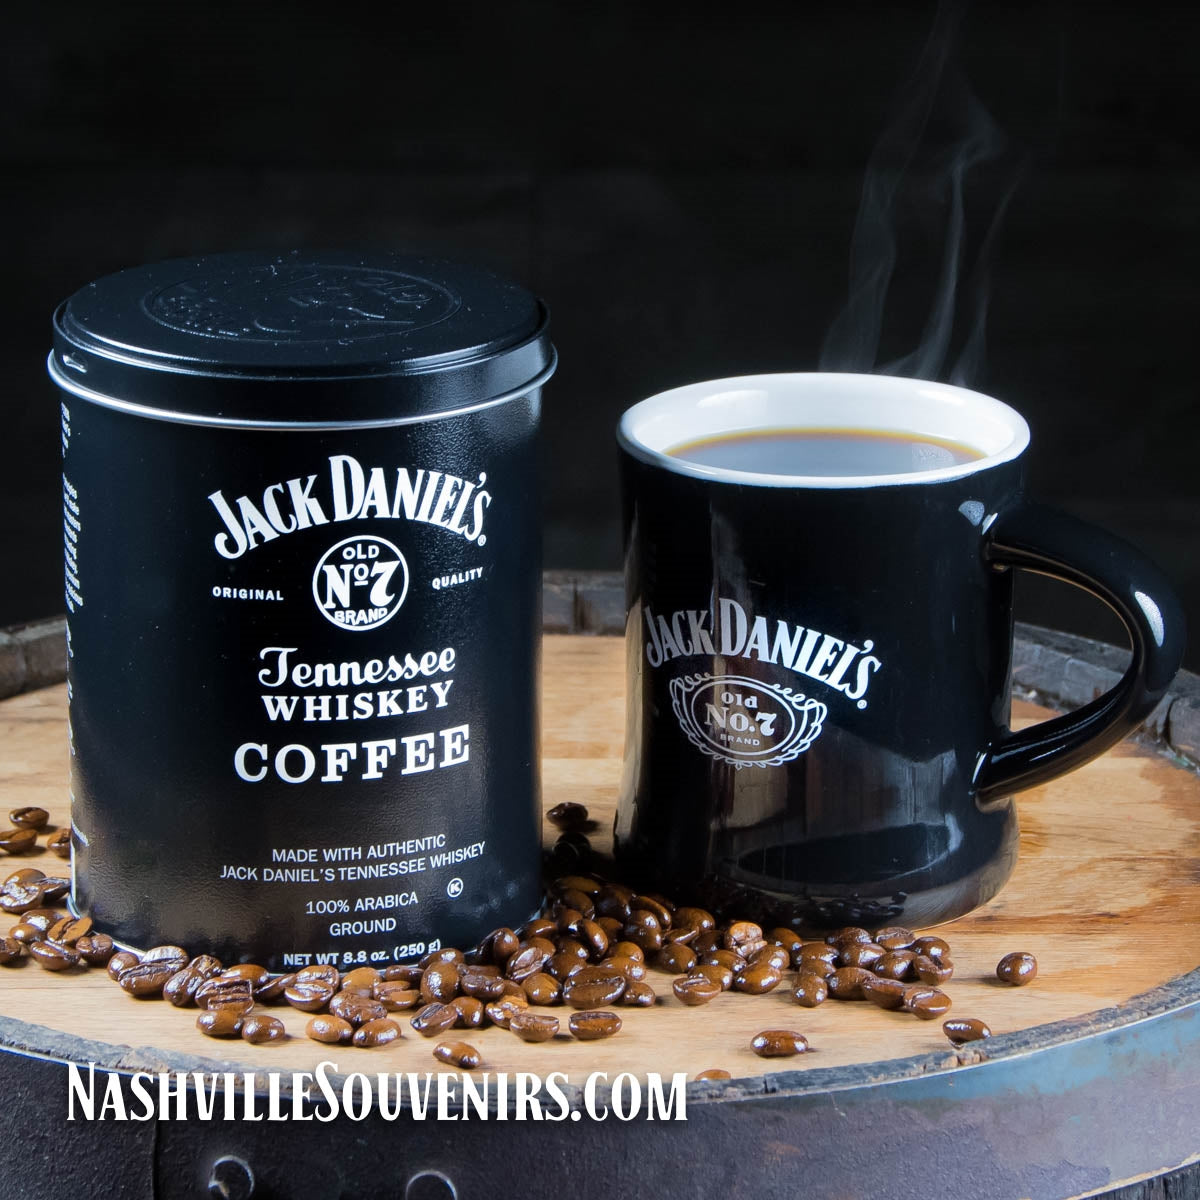 Sip your morning brew in this new Jack Daniel's Coffee and Black Diner Mug Gift Set. Get it today with FREE SHIPPING on all US orders over $75!